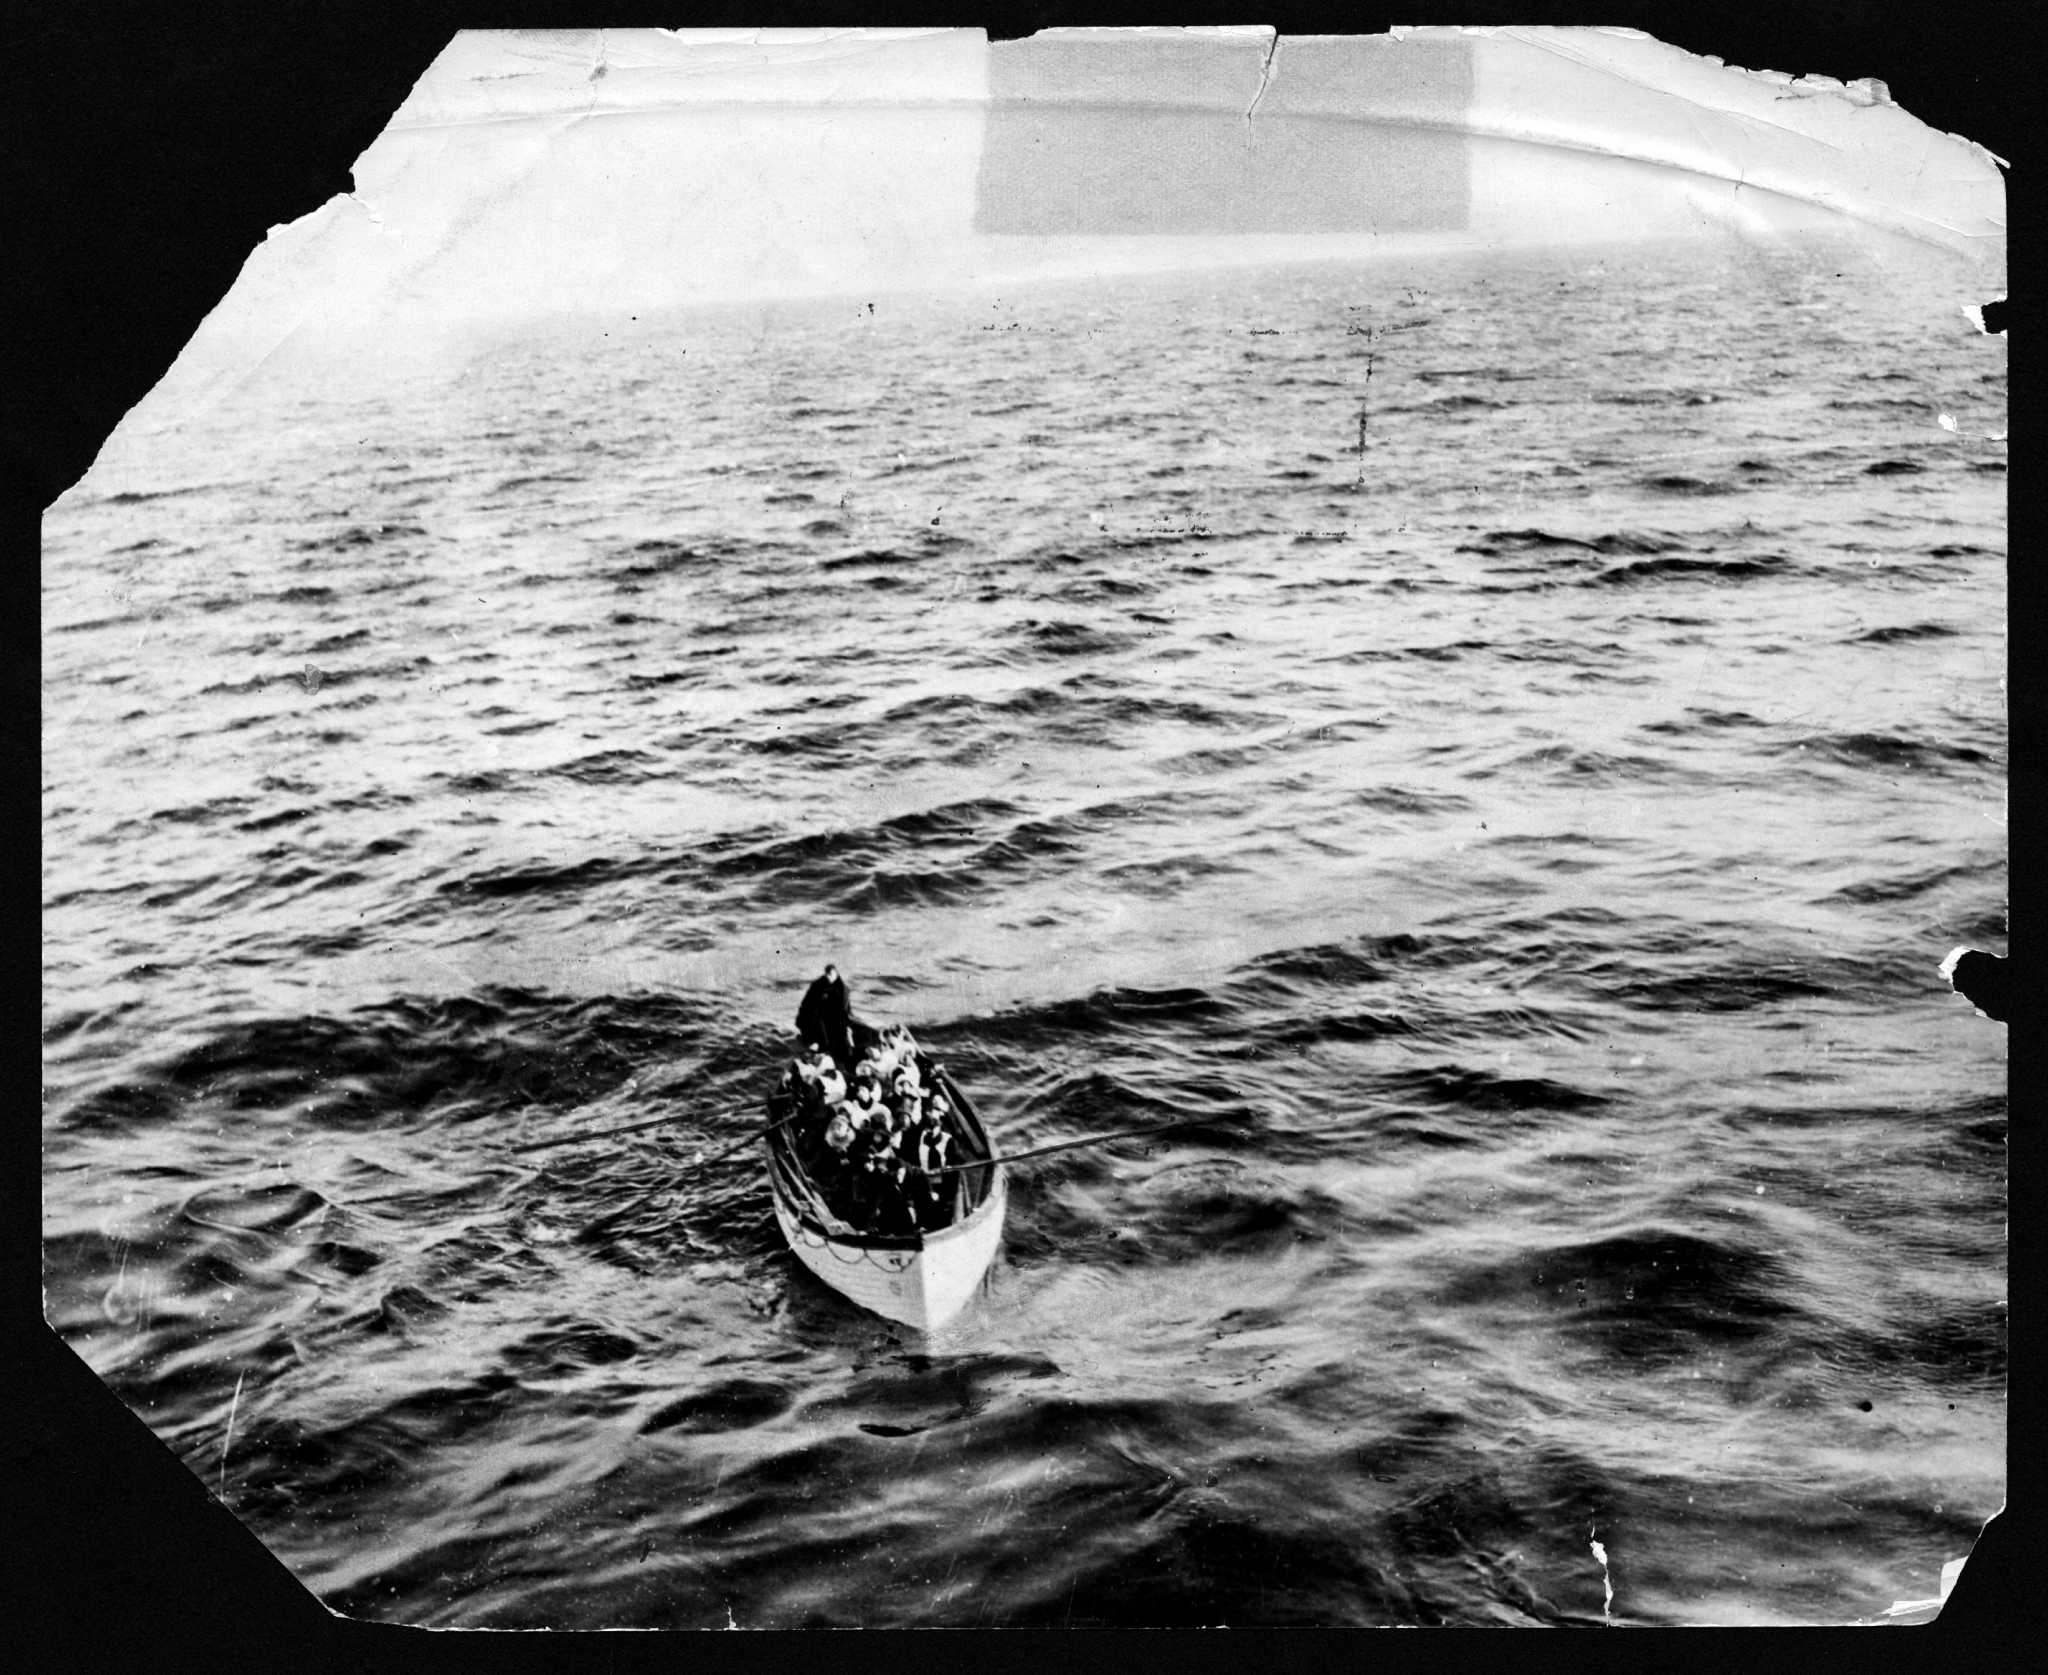 Historic images from the Titanic sinking